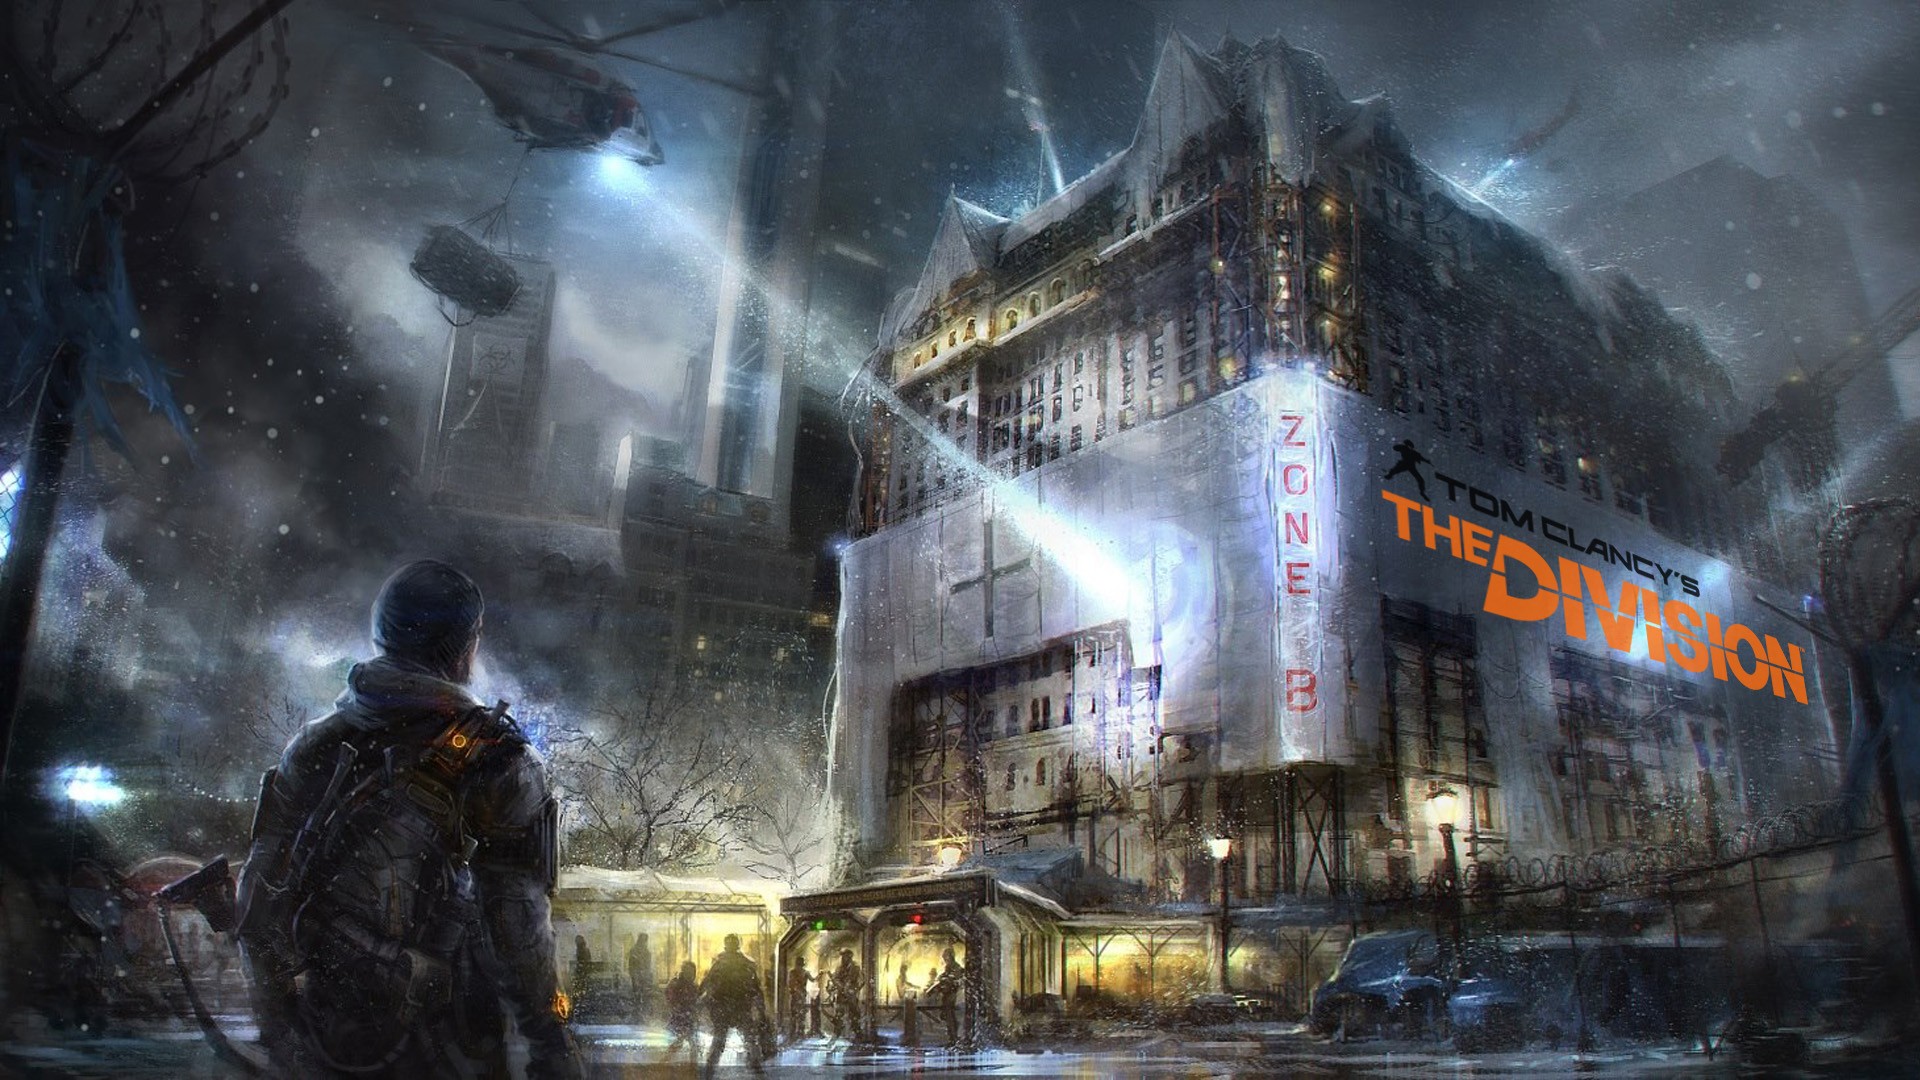 General 1920x1080 Tom Clancy's The Division apocalyptic concept art video games PC gaming video game art